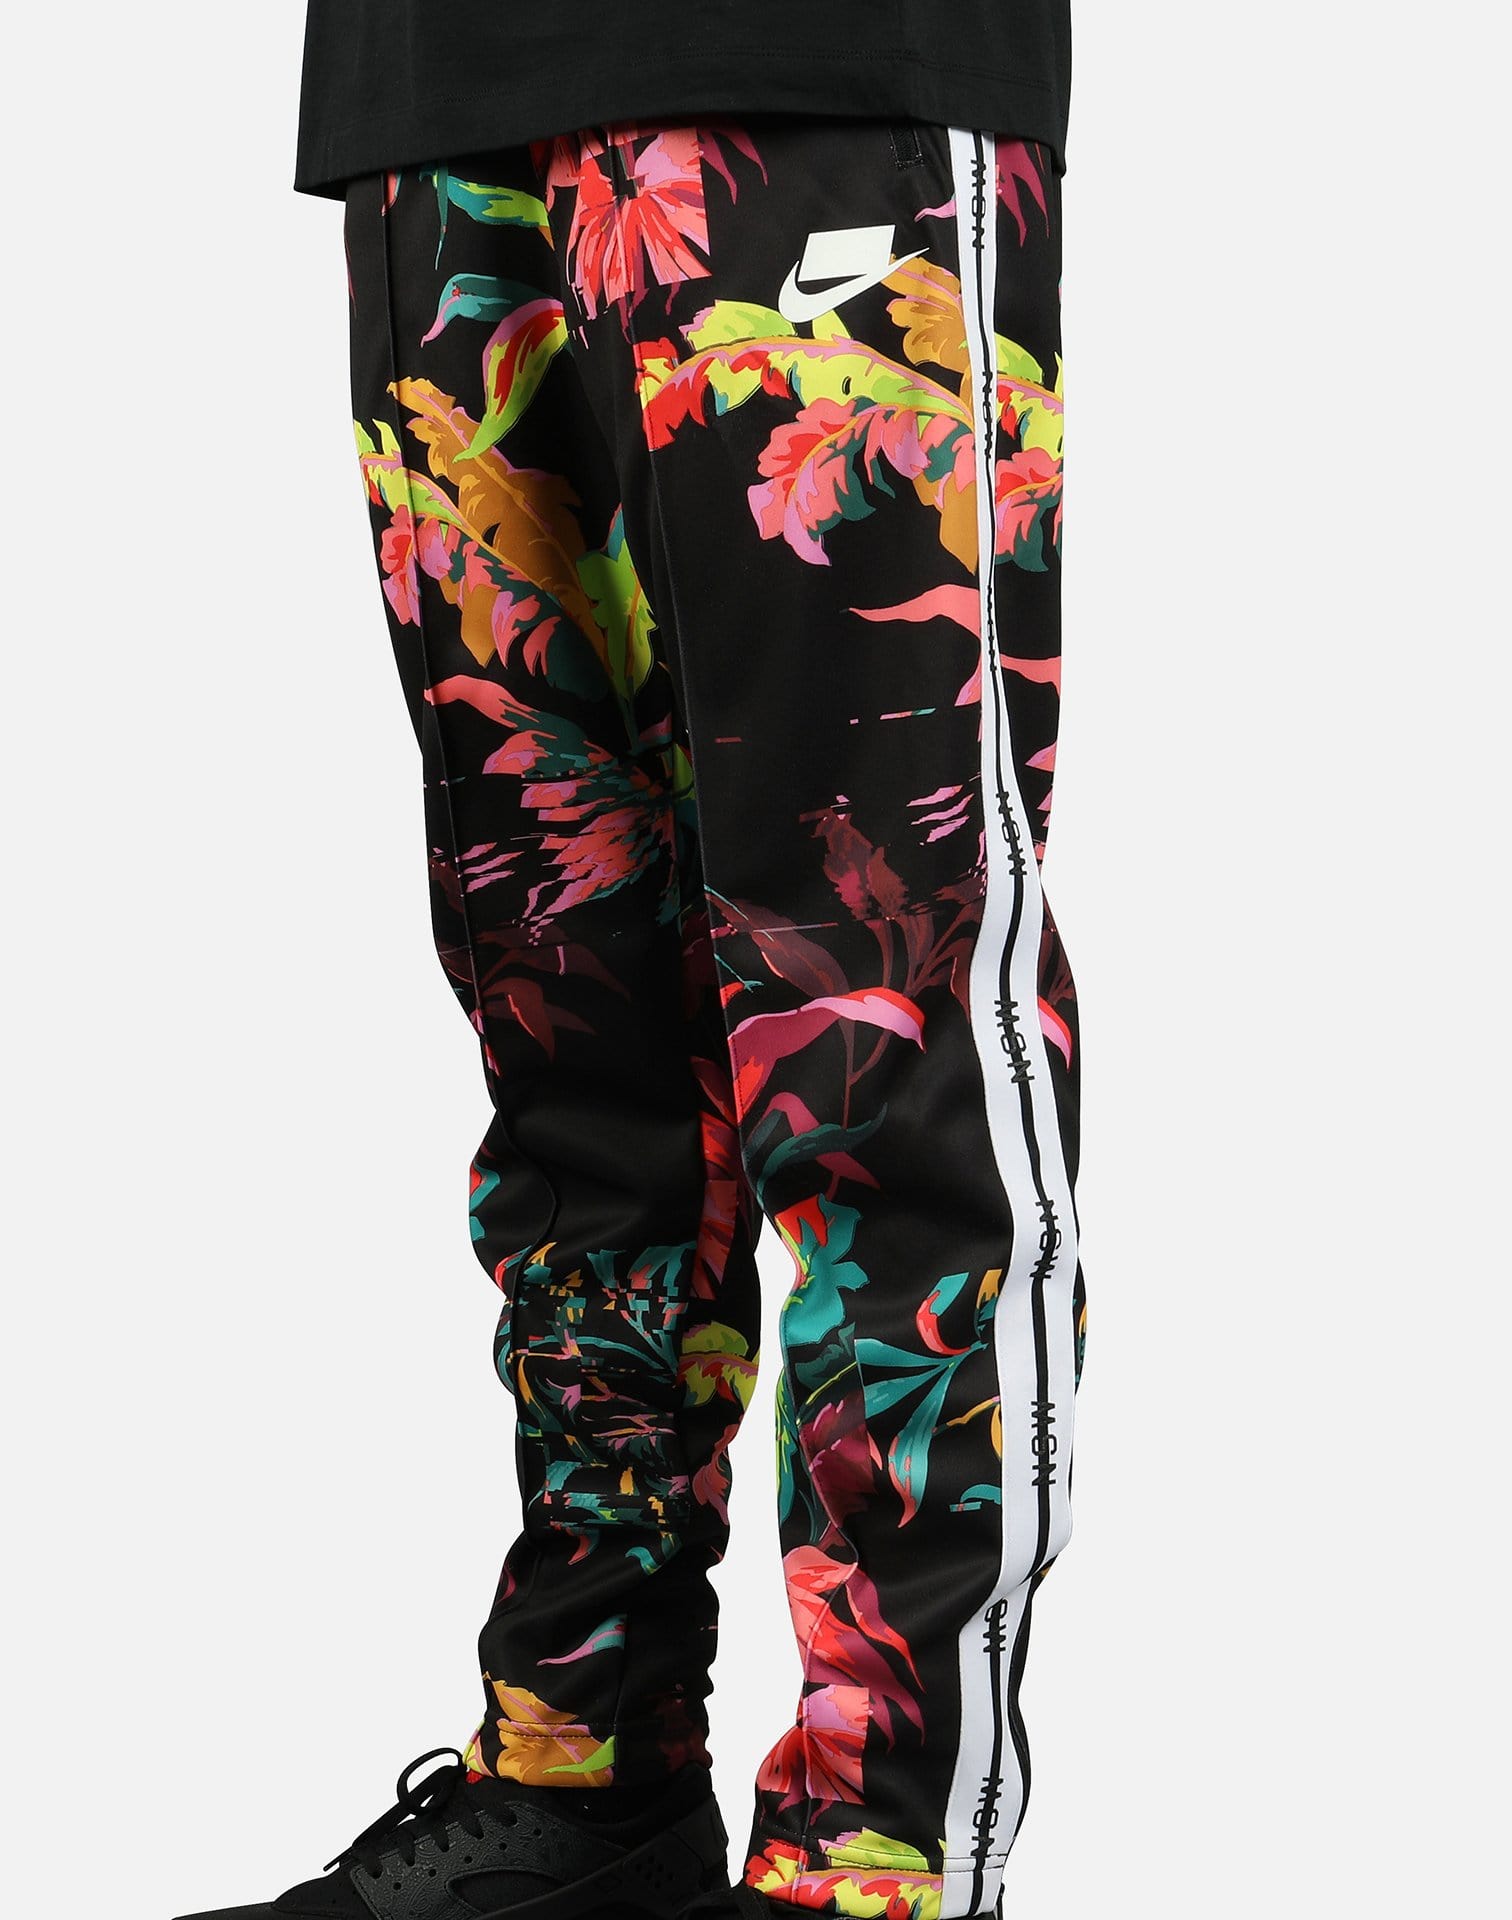 nike floral track pants,cheap - OFF 68% 